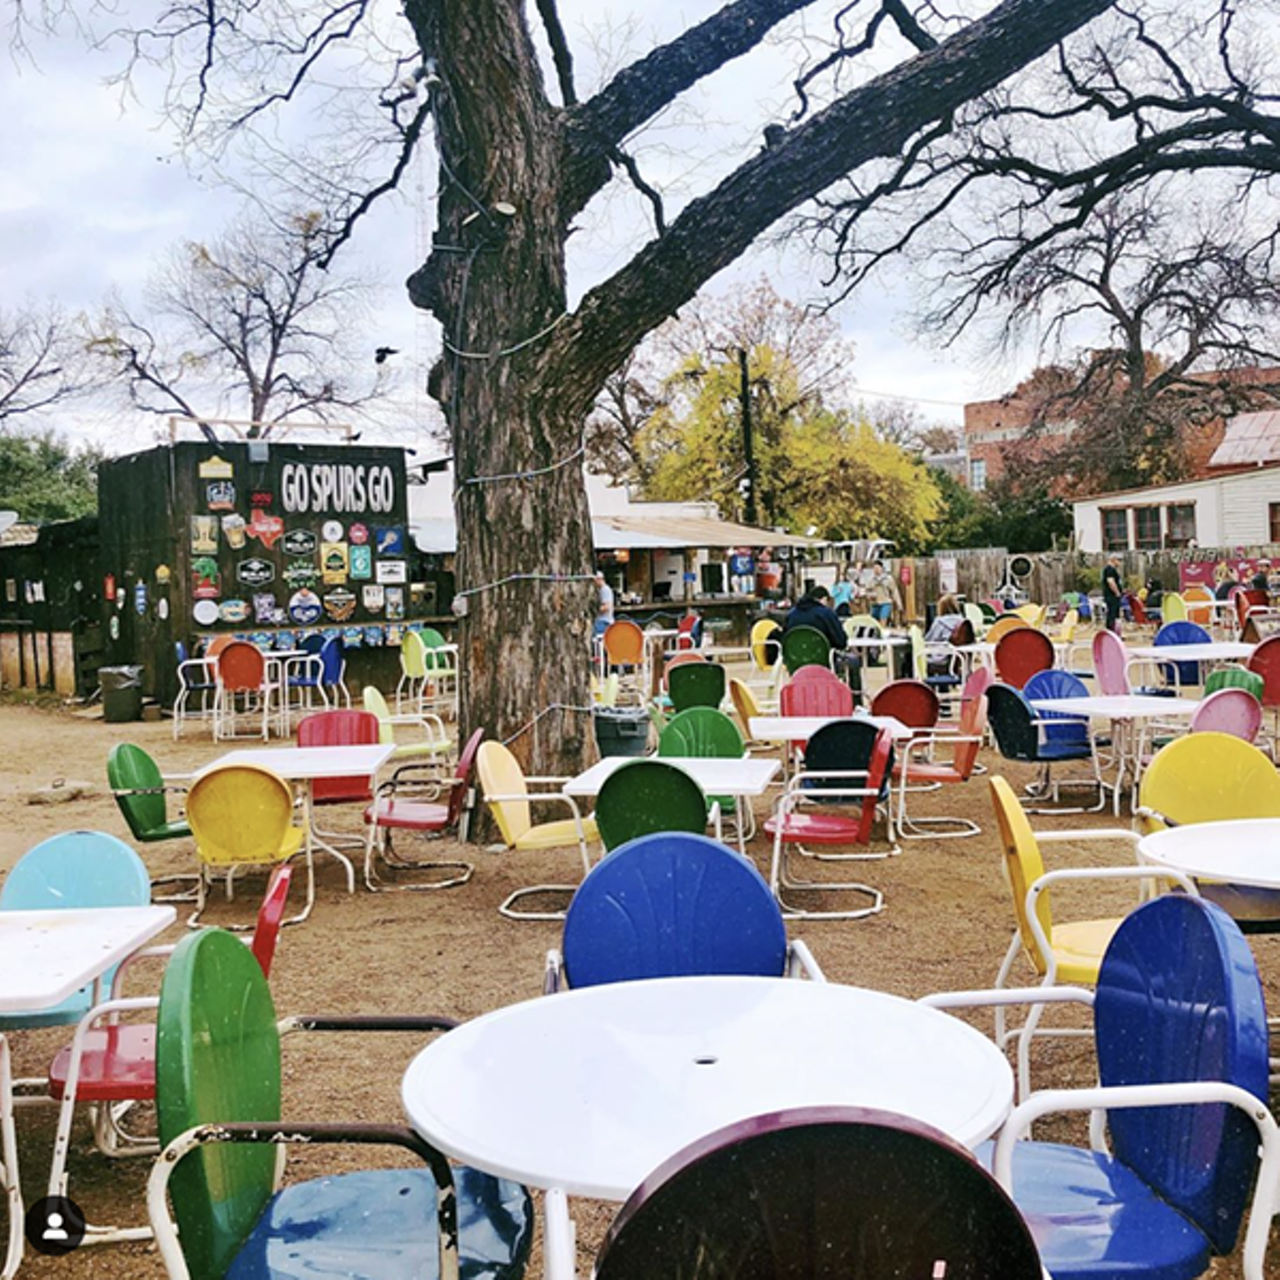 The Friendly Spot Ice House
943 S Alamo St., (210) 224-2337, thefriendlyspot.com
Southtown’s largest outdoor food and drink venue, The Friendly Spot, marries “friendly eats & drinks,” outdoor sports viewing and weekend DJ sets for a seriously laid back vibe that's a must-try.  
Photo via Instagram /  
lizzie.blank